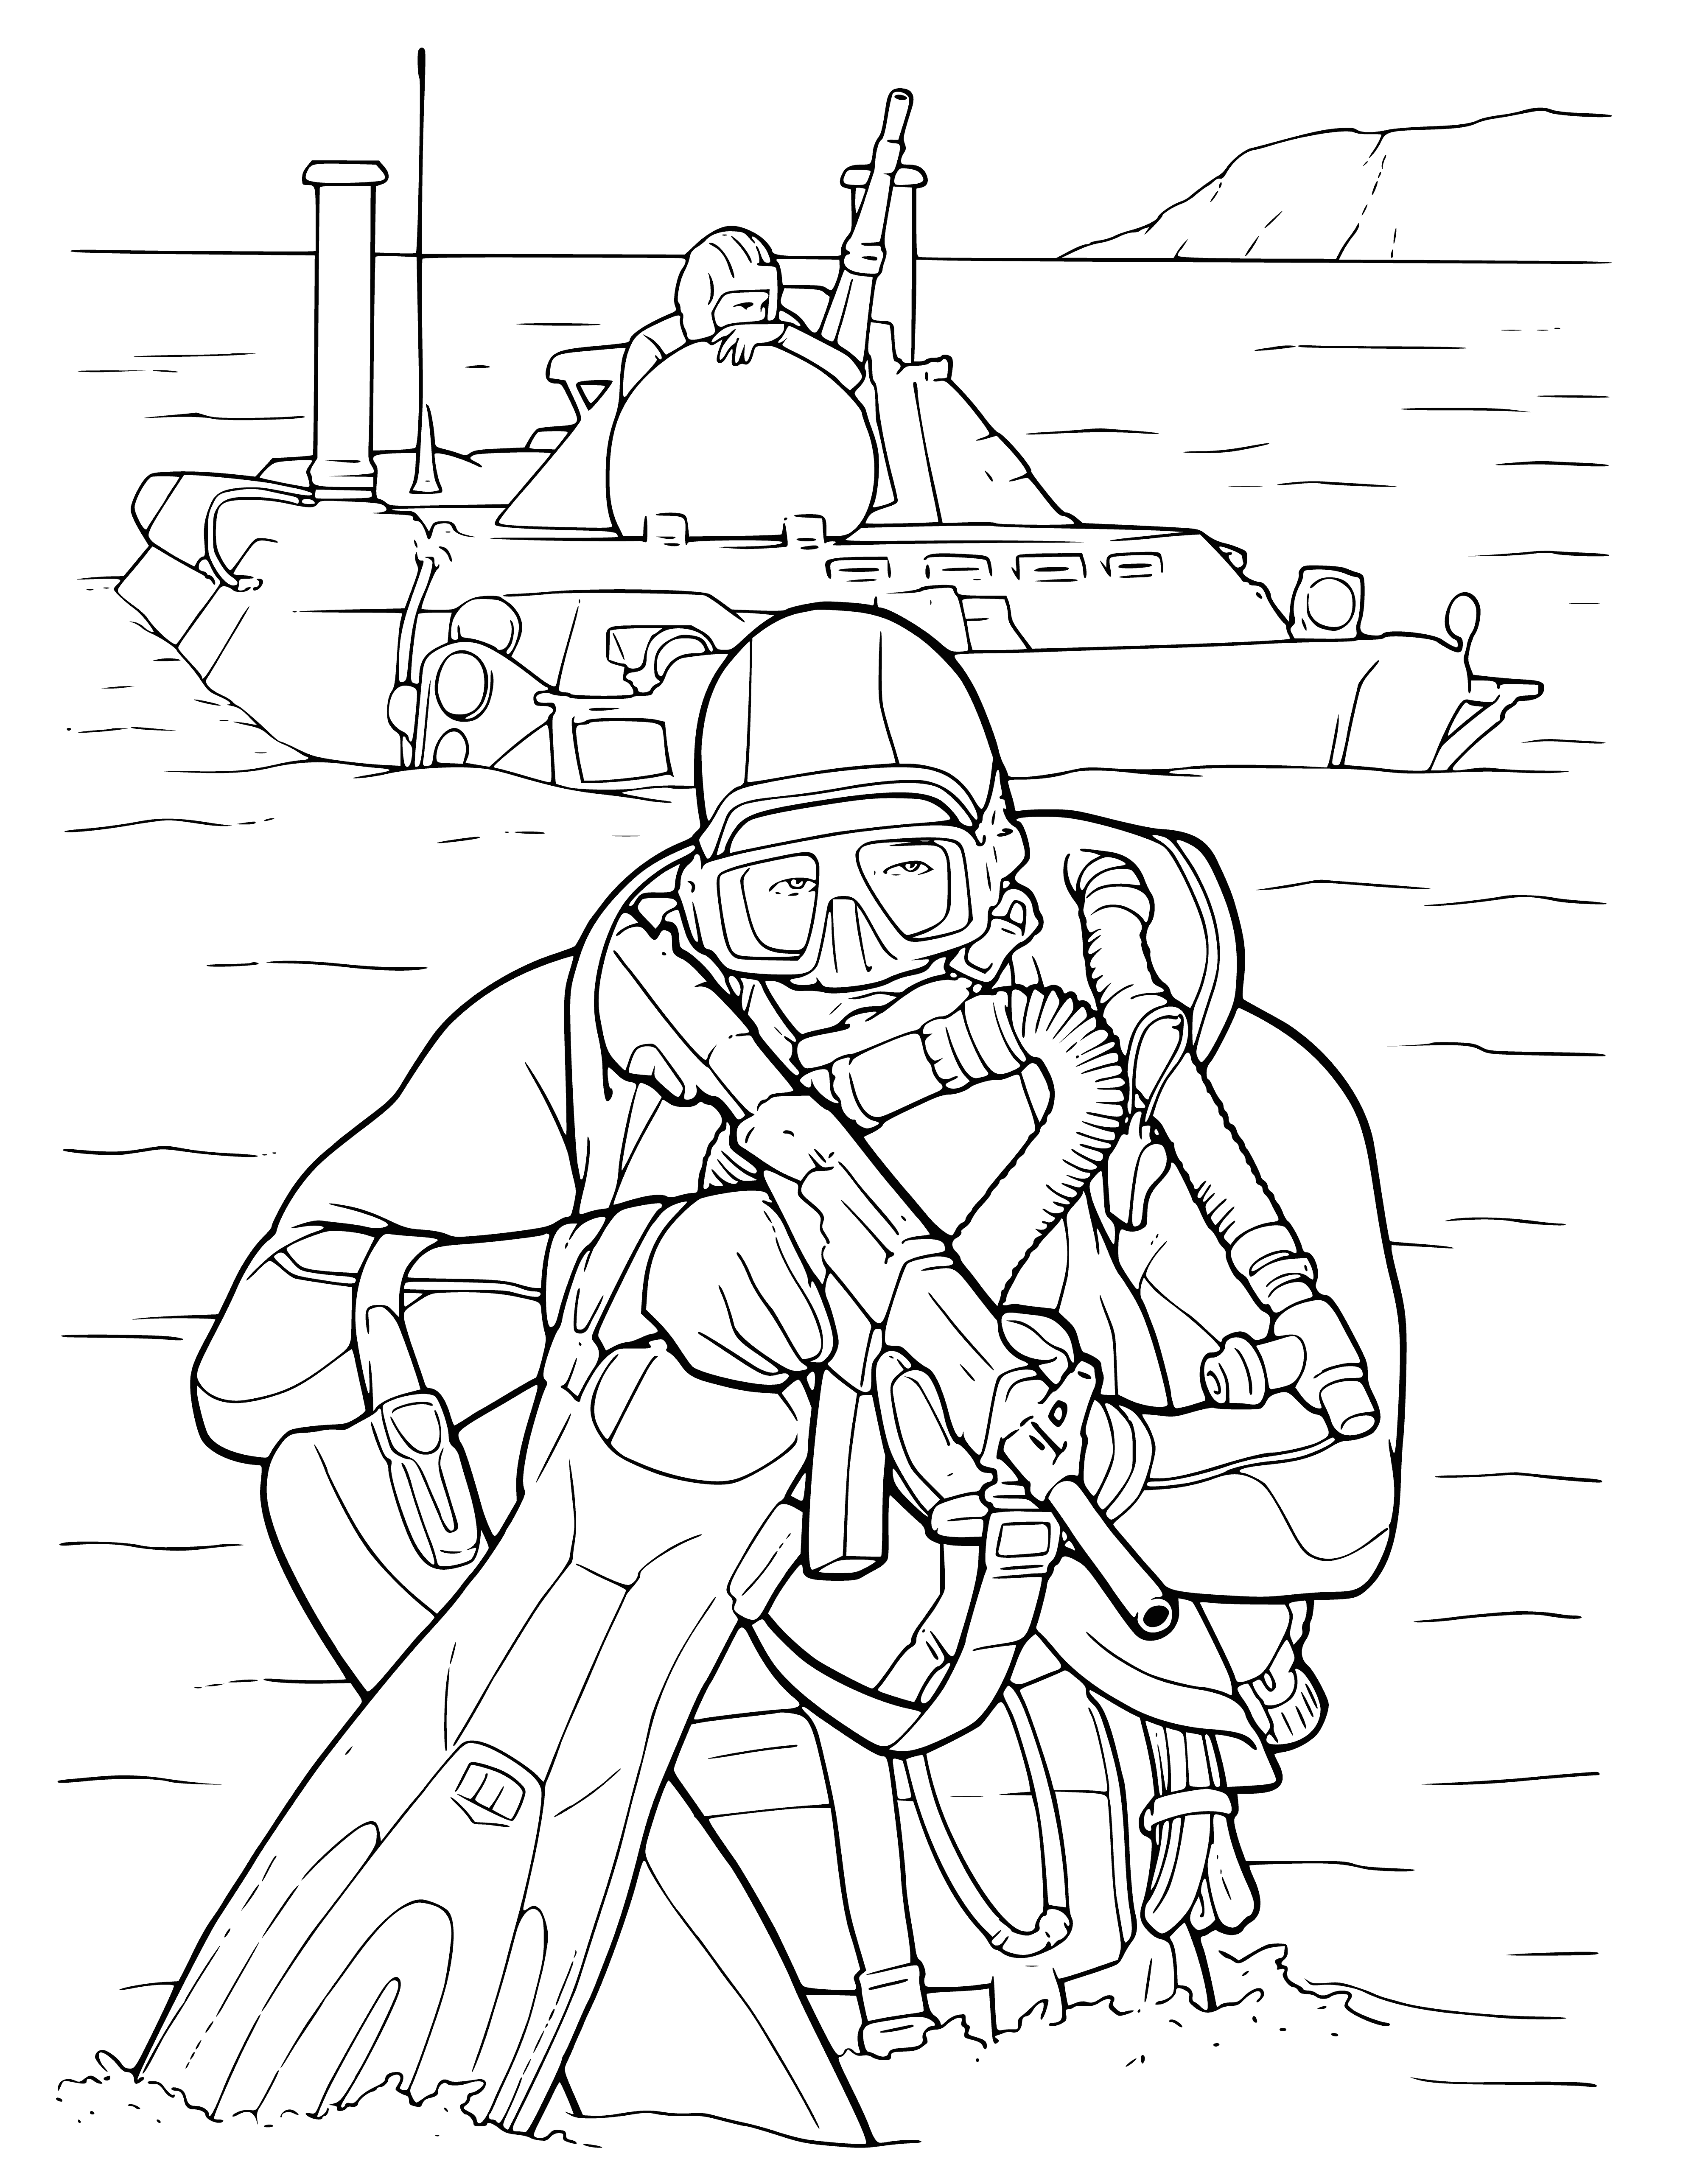 Marine Corps soldiers coloring page